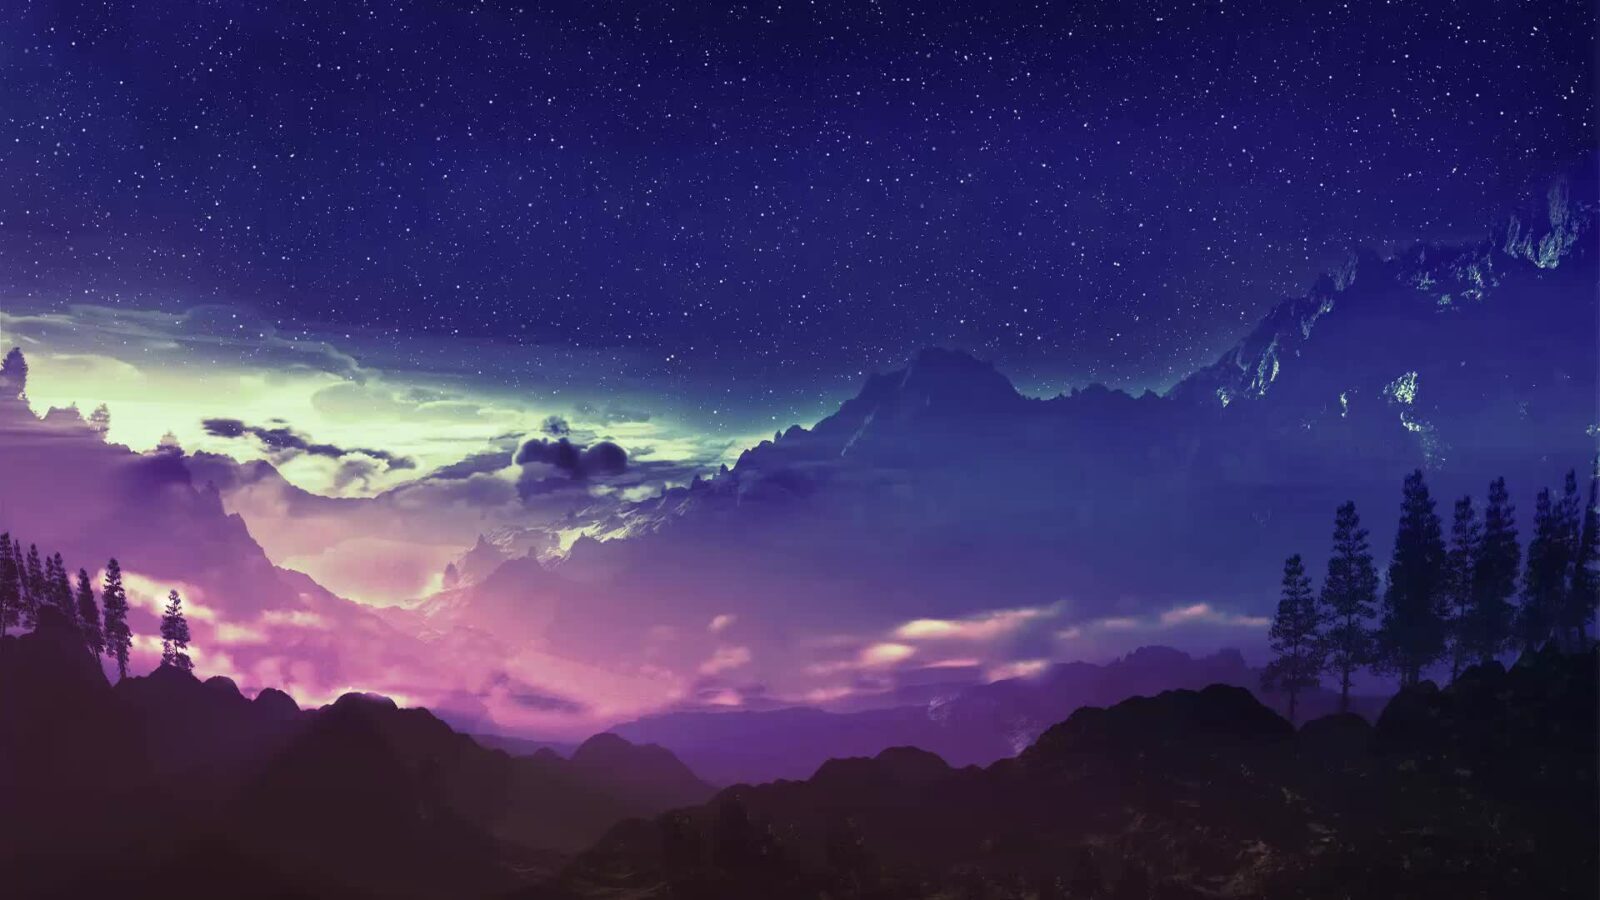 LiveWallpapers4Free.com | Mountain With Stars - Nature Live Wallpaper